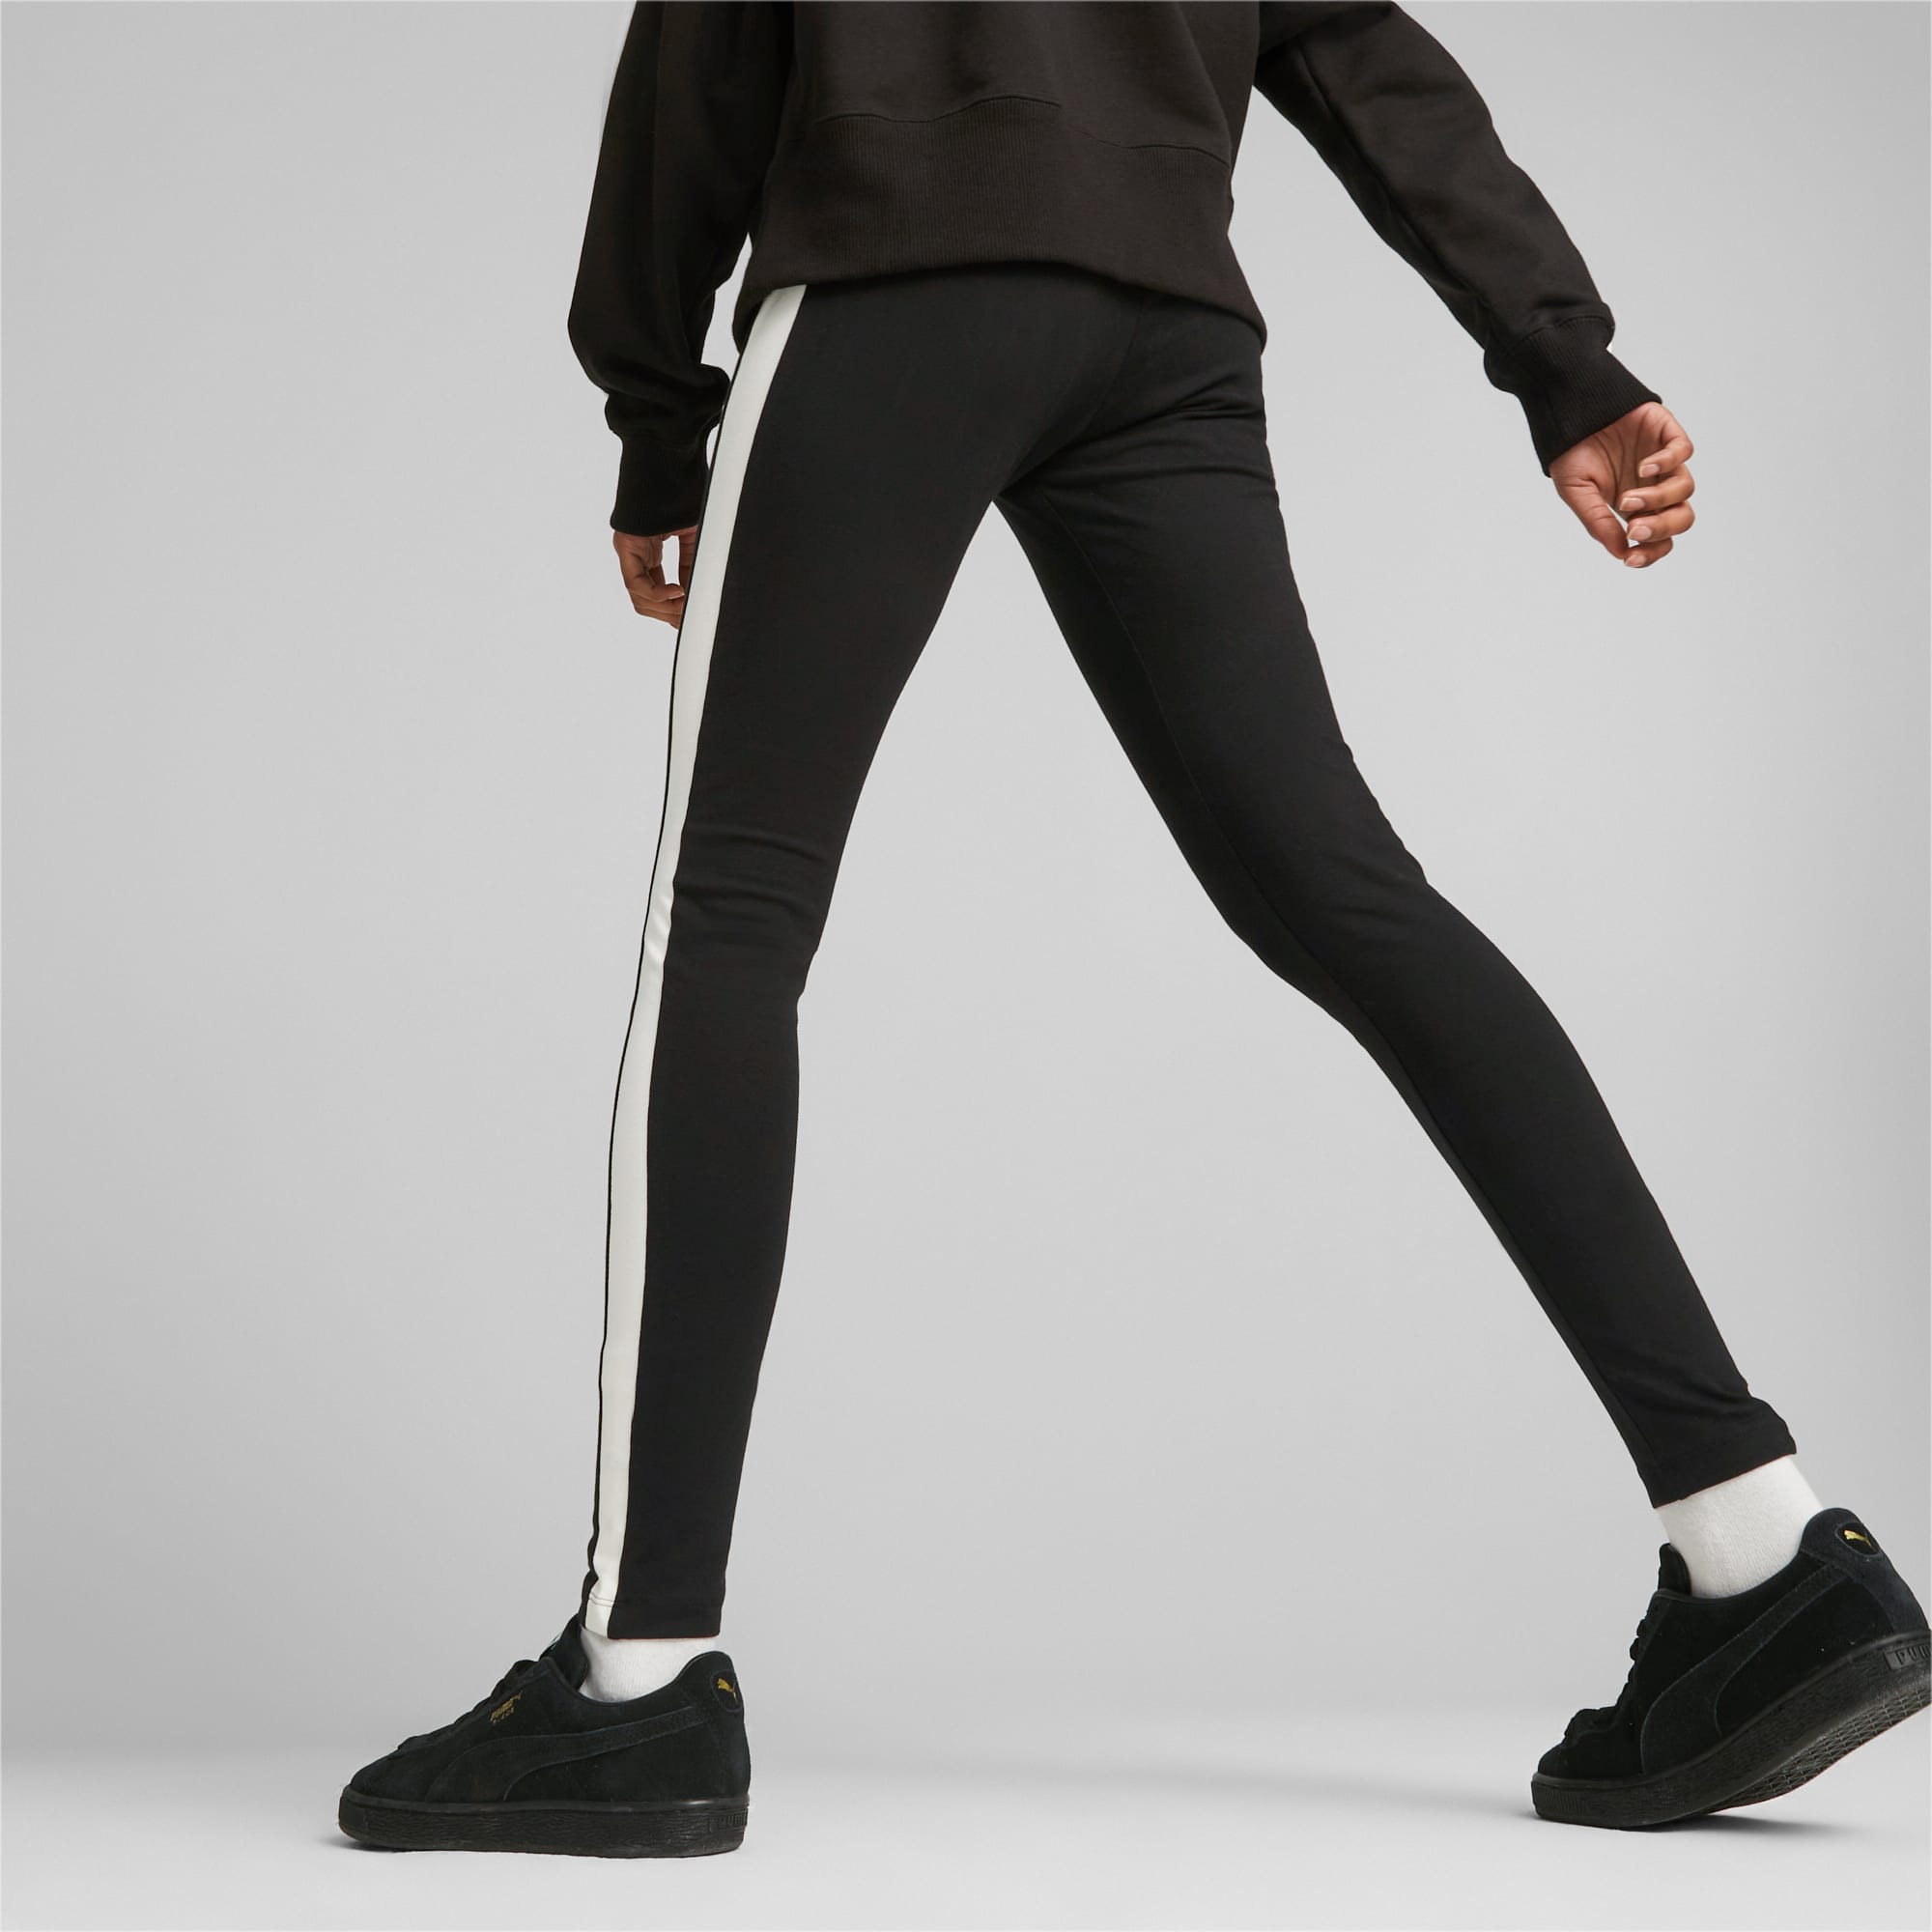 Puma Running favourite mid rise leggings with yellow pop in gray